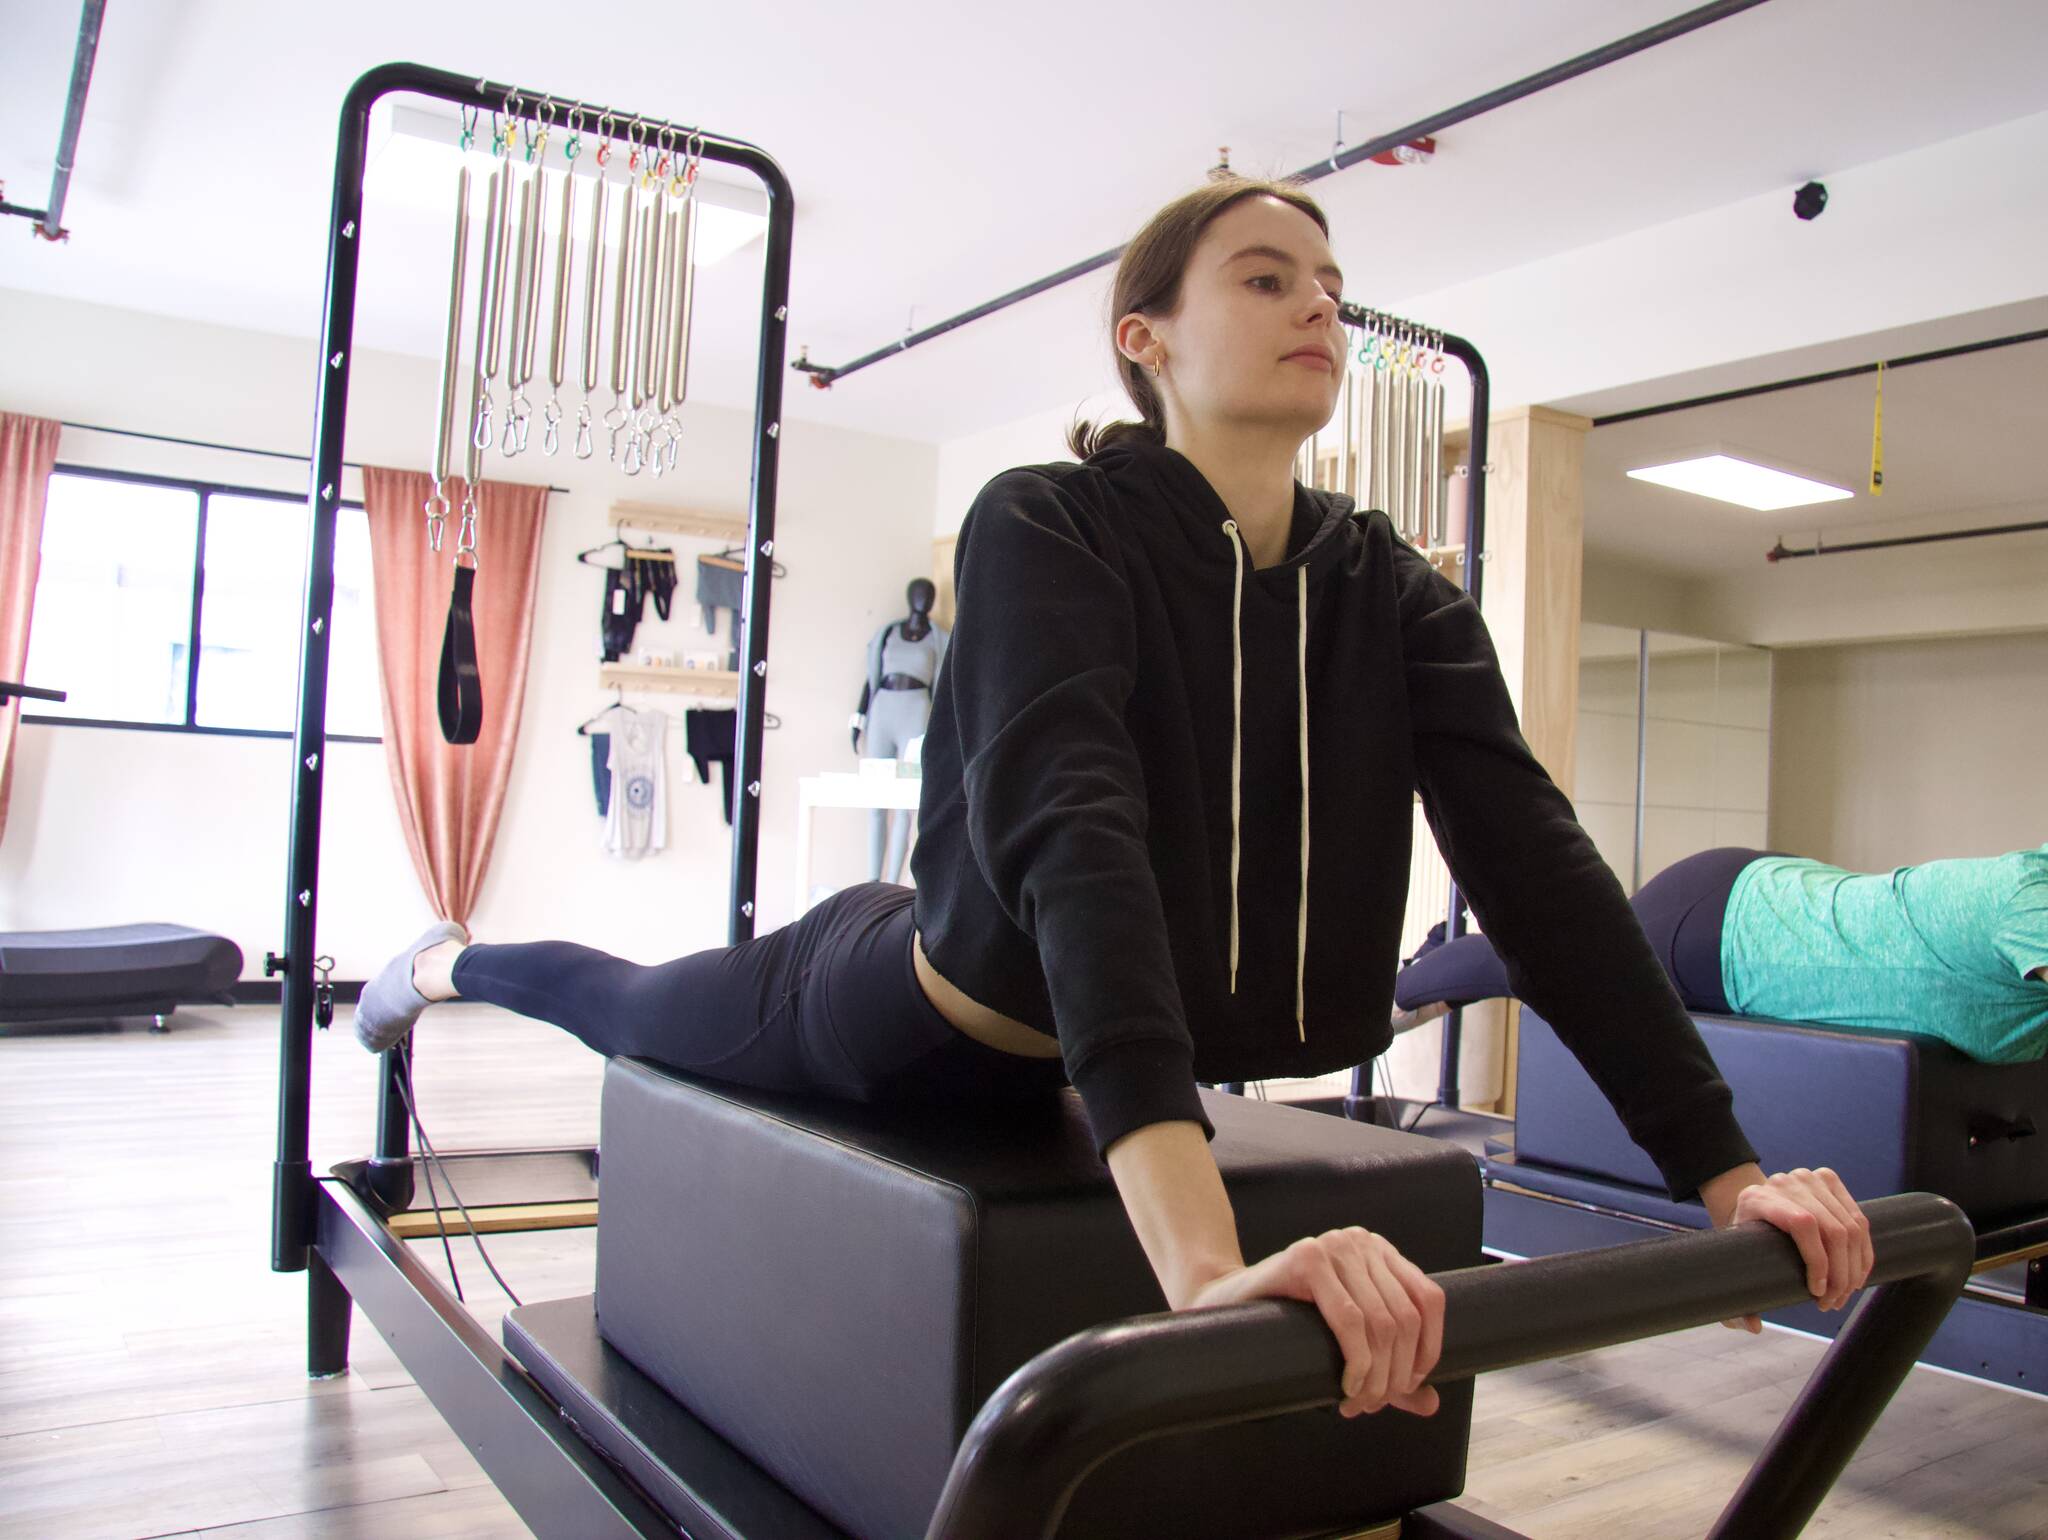 Photo by Brandon Berry
Traditional Pilates classes utilize a reformer machine.